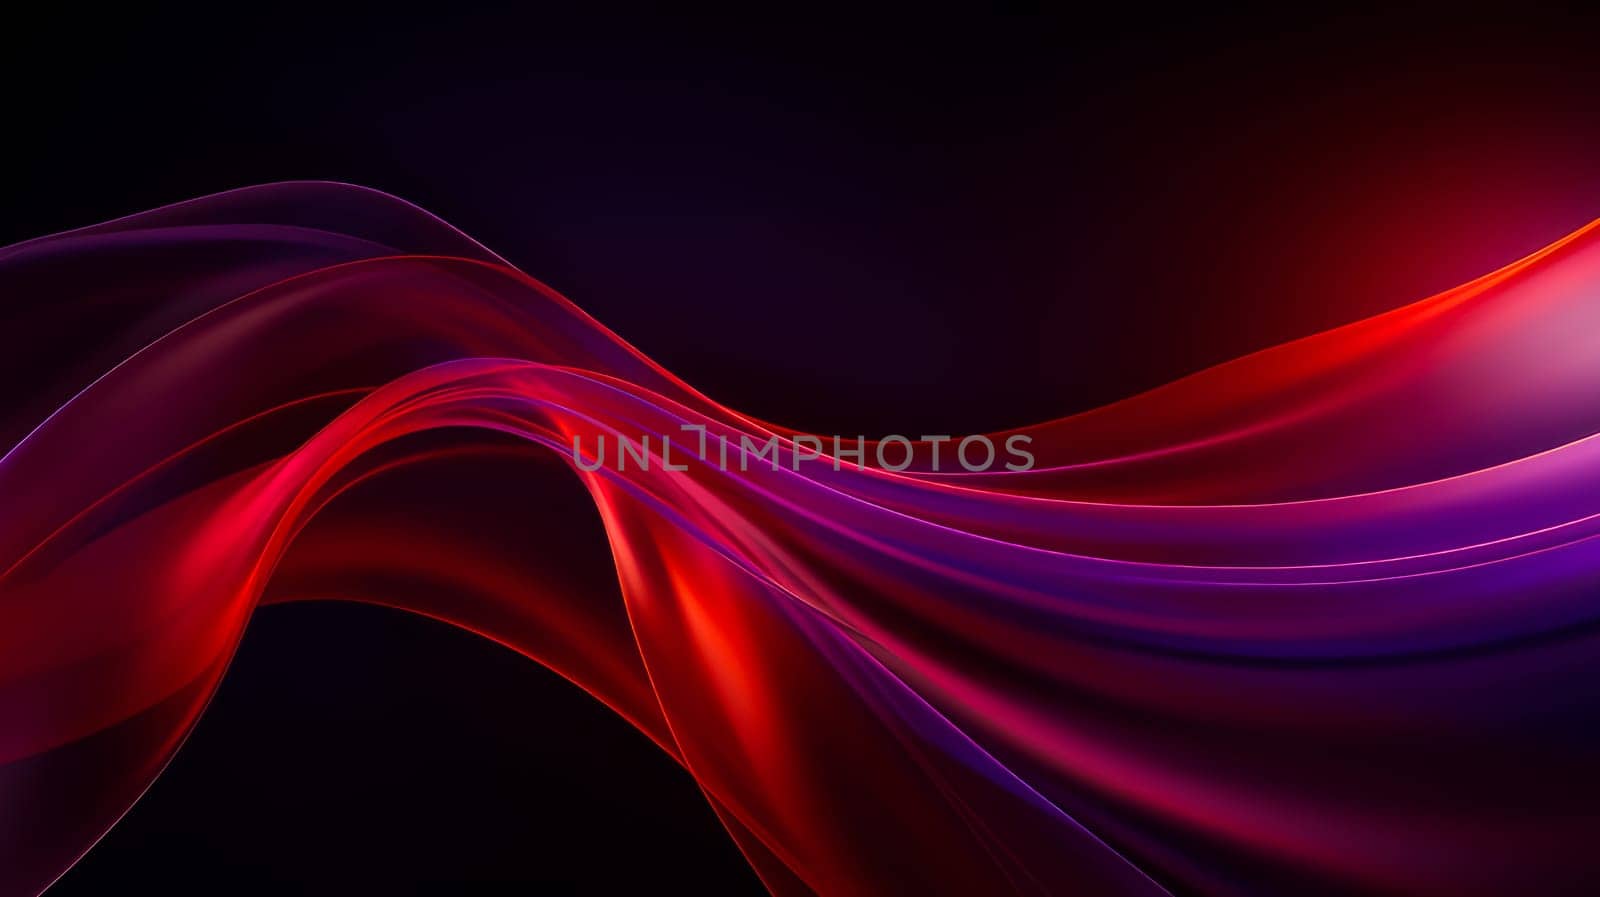 Beautiful luxury 3D modern abstract neon red purple background composed of waves with light digital effect in futuristic style. by Alla_Yurtayeva